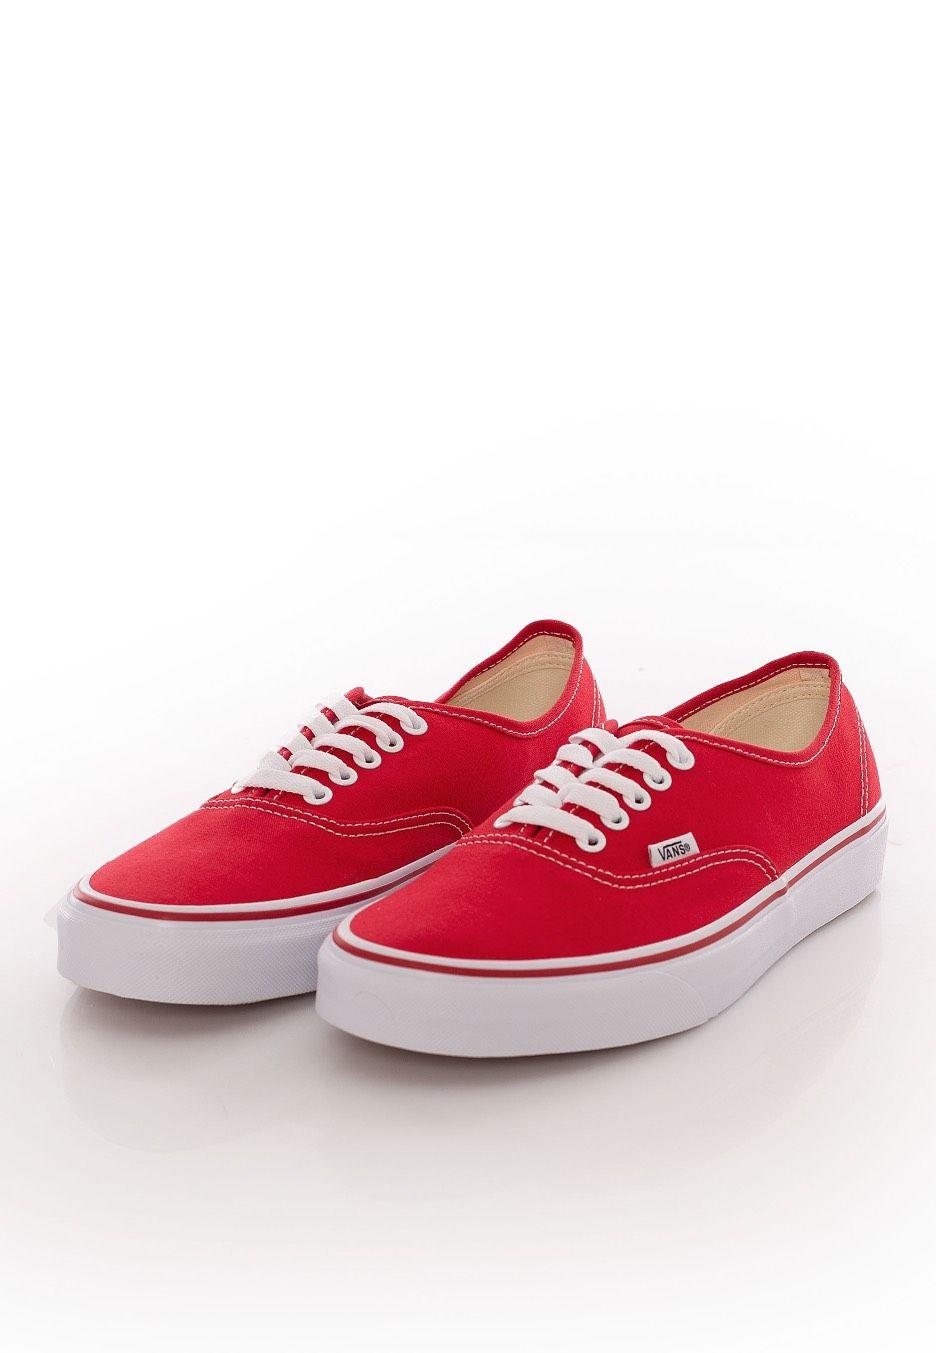 Red White Vans Logo - Vans - Authentic Red/White - Shoes - Impericon.com US